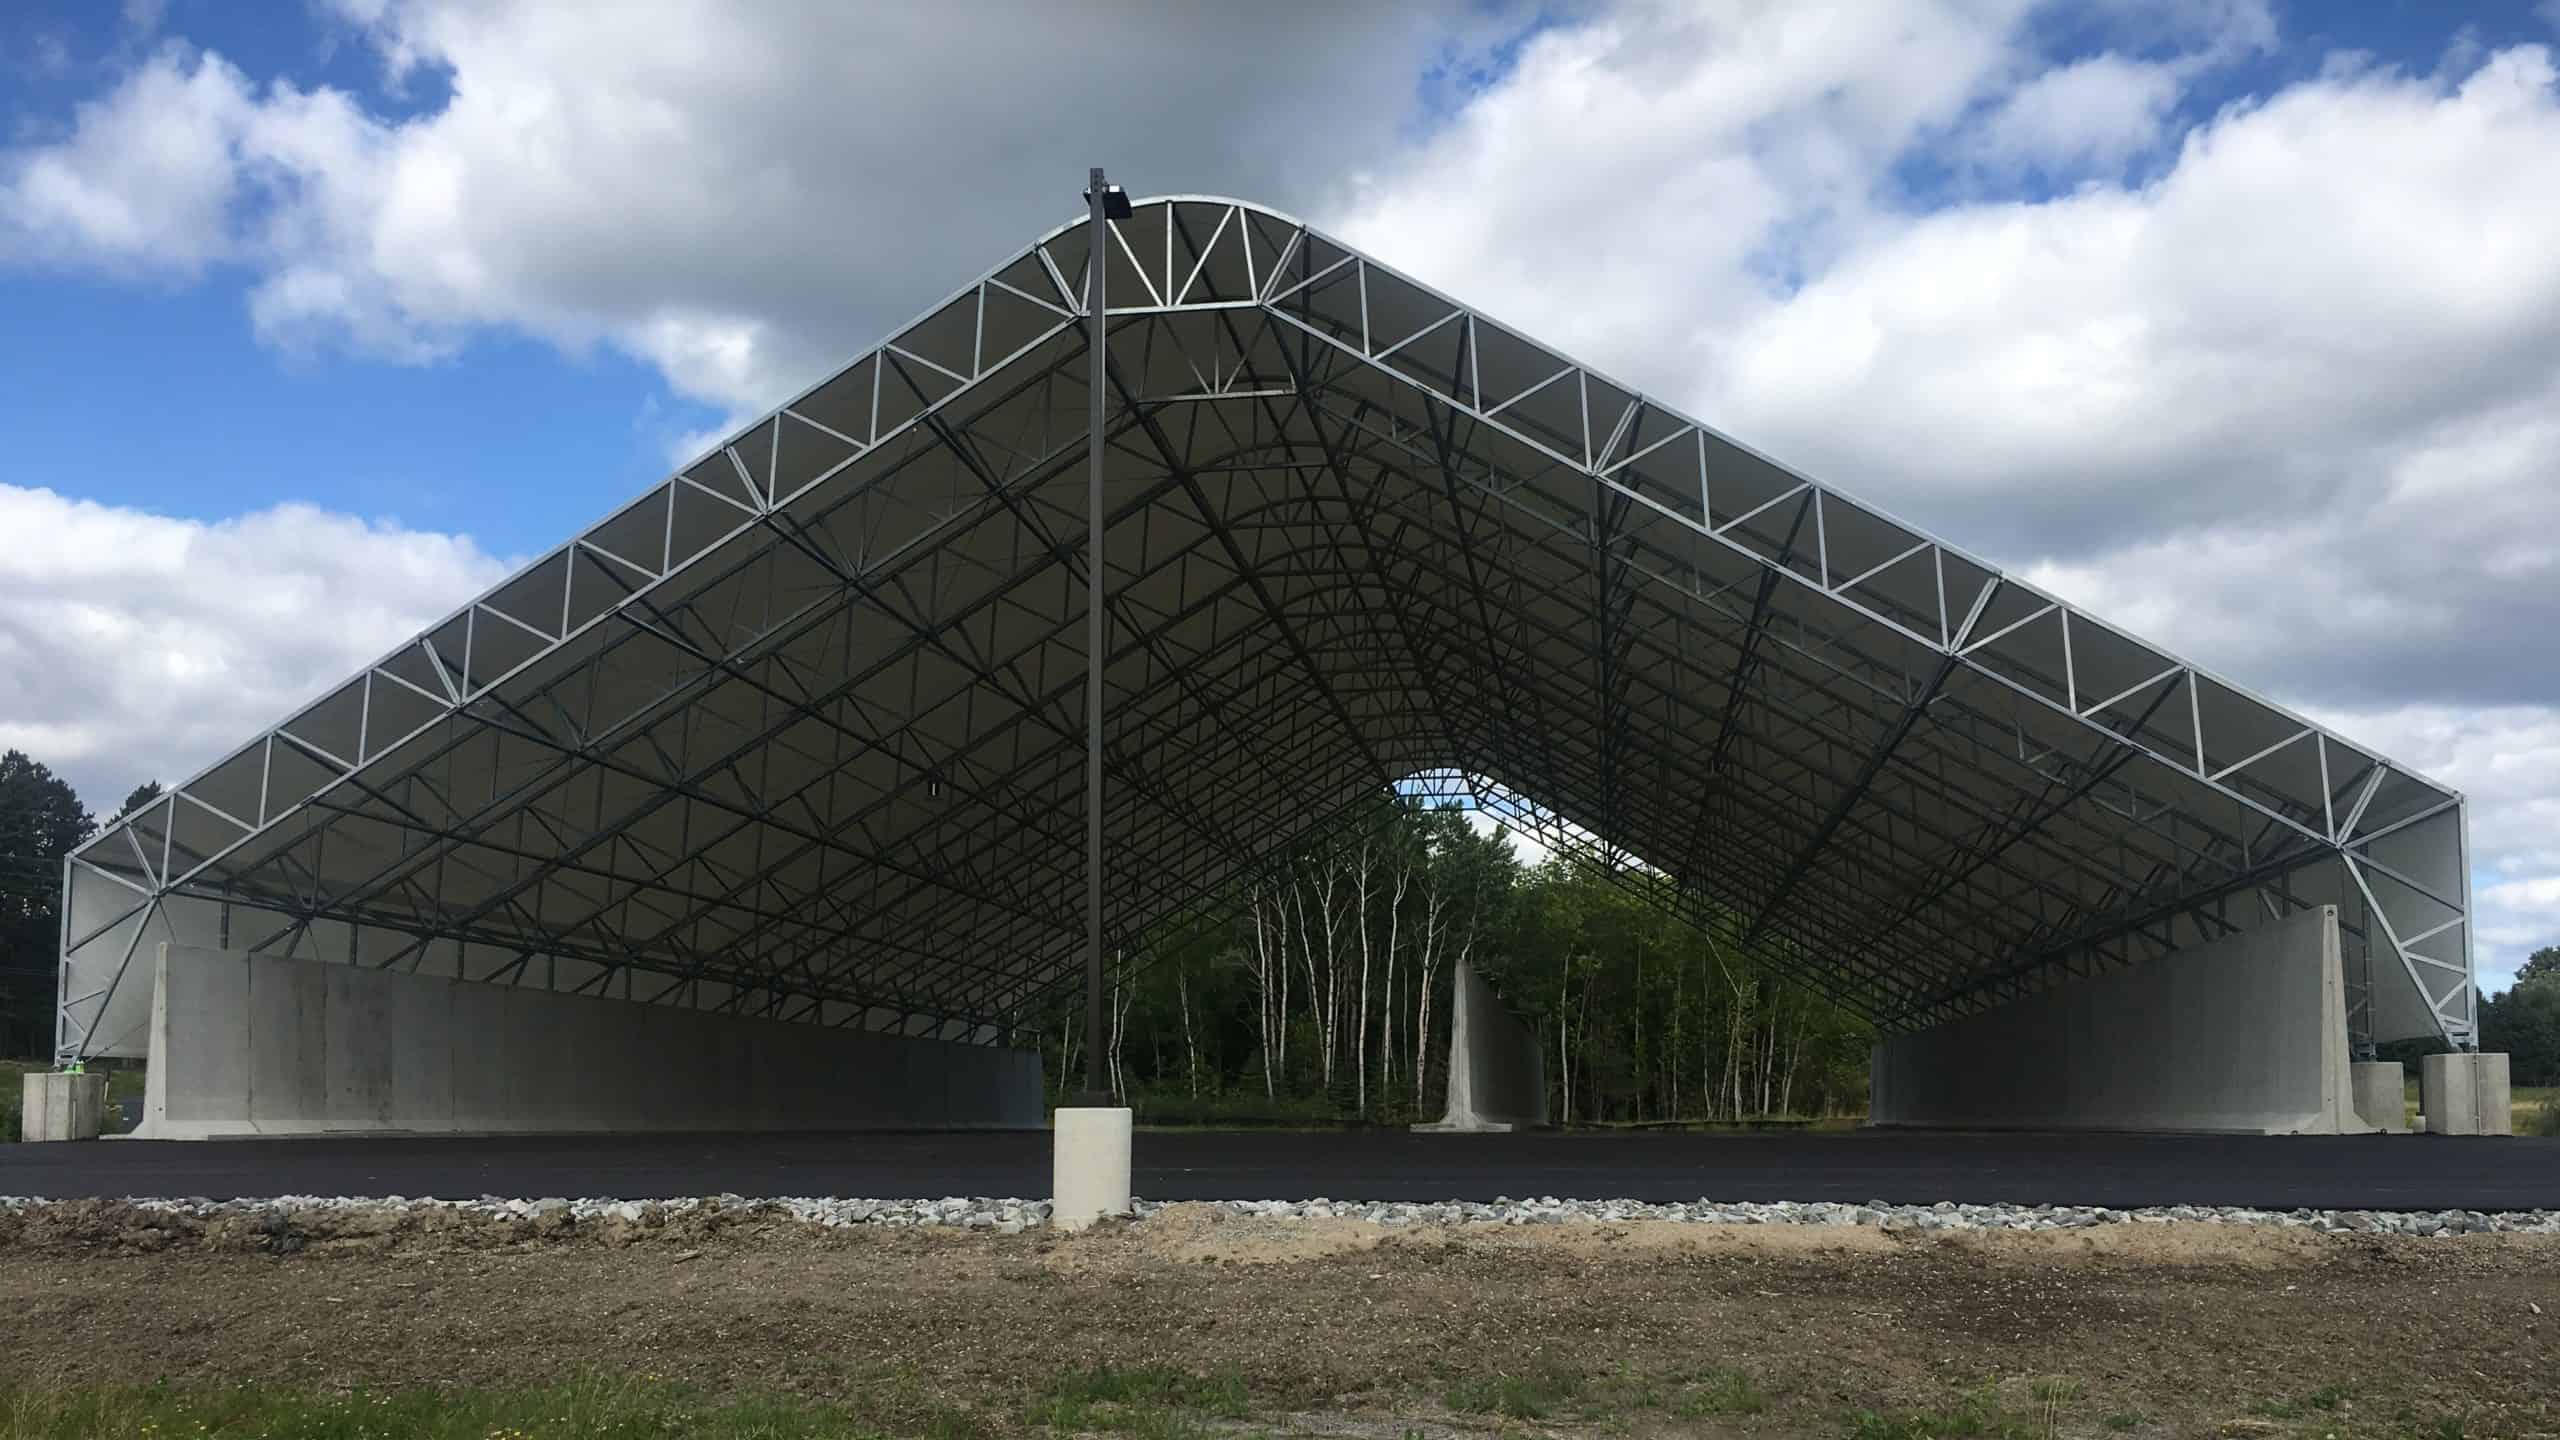 St. Louis County Salt and Sand Storage by Wieser Concrete